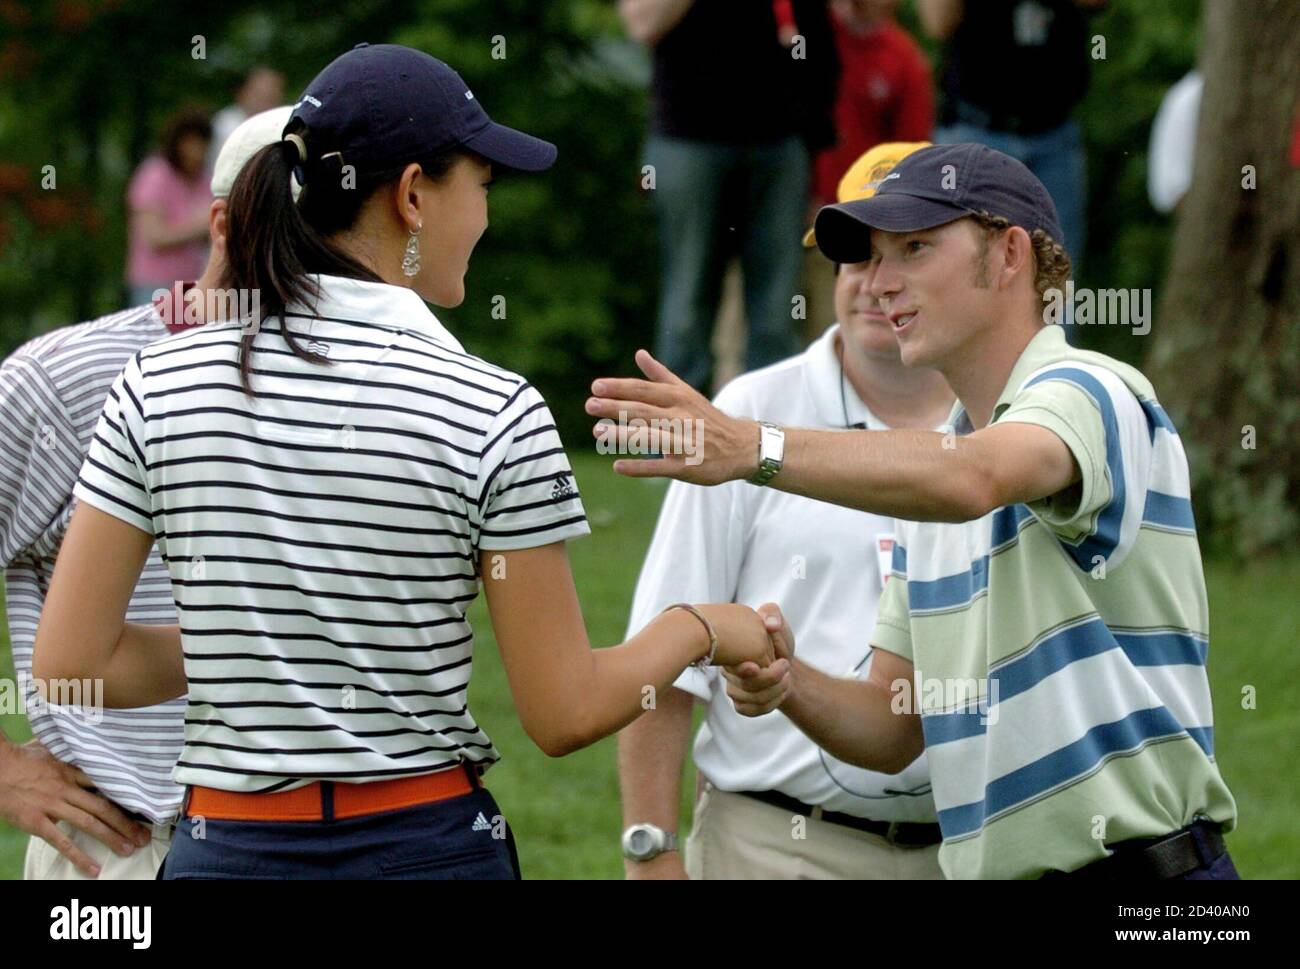 Michelle Wie shakes hands with Clay Ogden after Ogden defeated her in their quarter-final round in Lebanon, Ohio.  Michelle Wie (L) of the U.S. shakes hands with compatriot Clay Ogden (R) after Ogden defeated her 5 and 4 in their quarter-final round of match play in the 2005 United States Amateur Public Links Championship at Shaker Run Golf Club in Lebanon, Ohio, July 15, 2005. REUTERS/John Sommers II Stock Photo